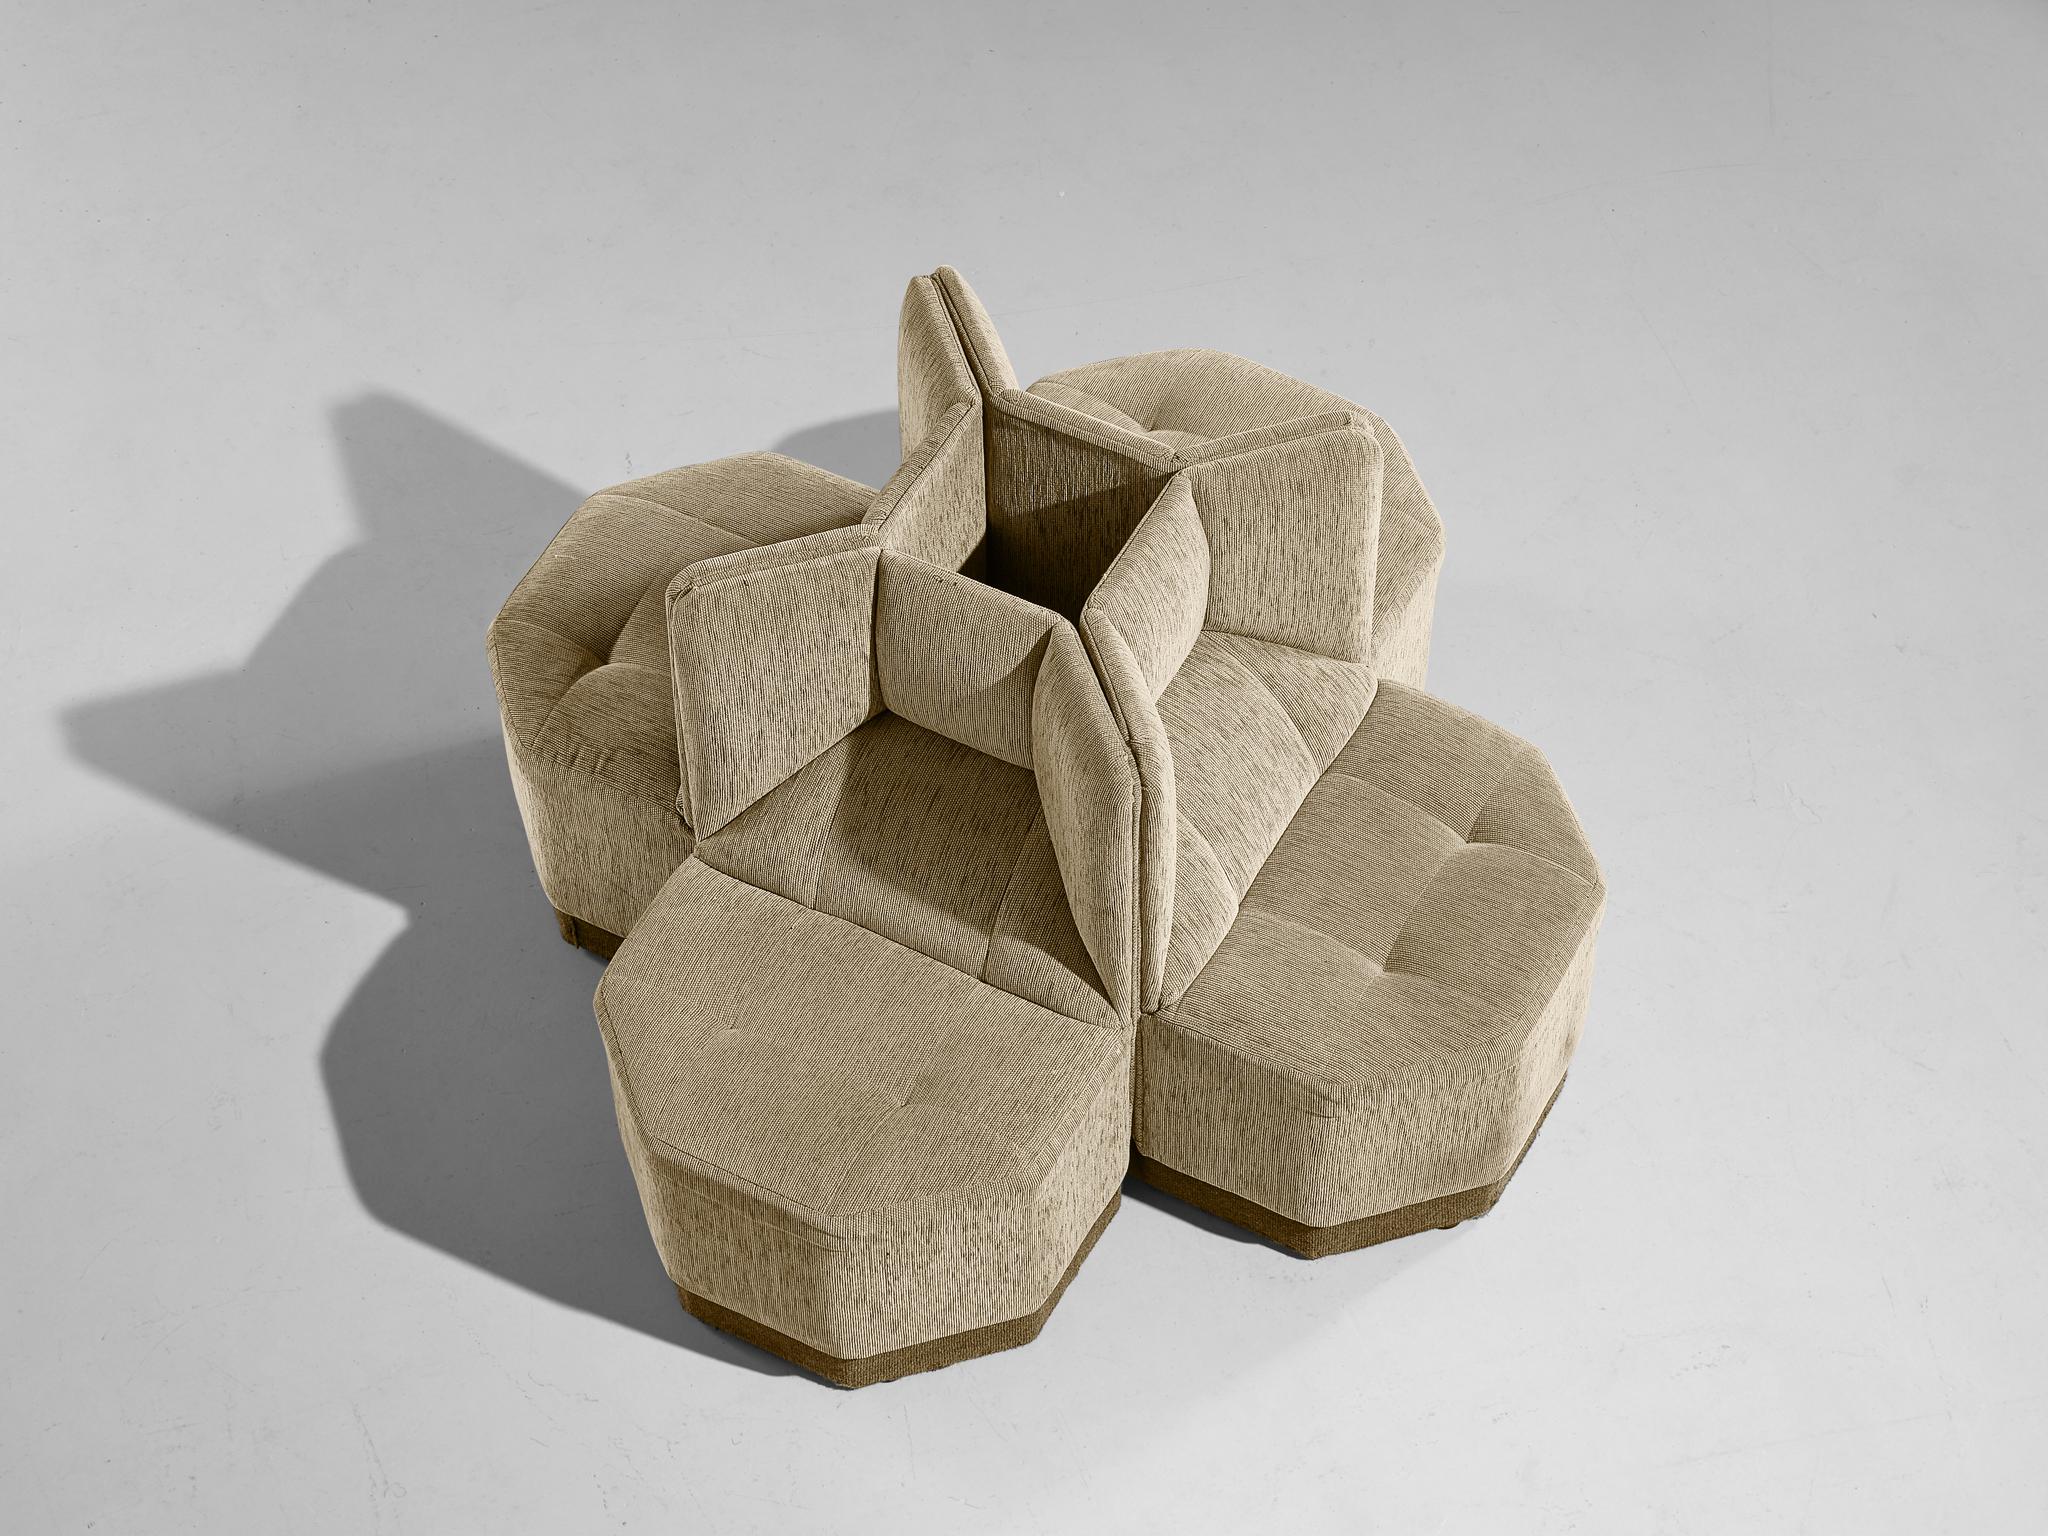 Side chairs, fabric, wood, Europe, 1980s.

Incredible side chairs in unusual shape. Their octagonal shape contributes to the strikingly rare appearance. The backrest follows the geometric form of the base and seat. Due to their sculptural shape, the